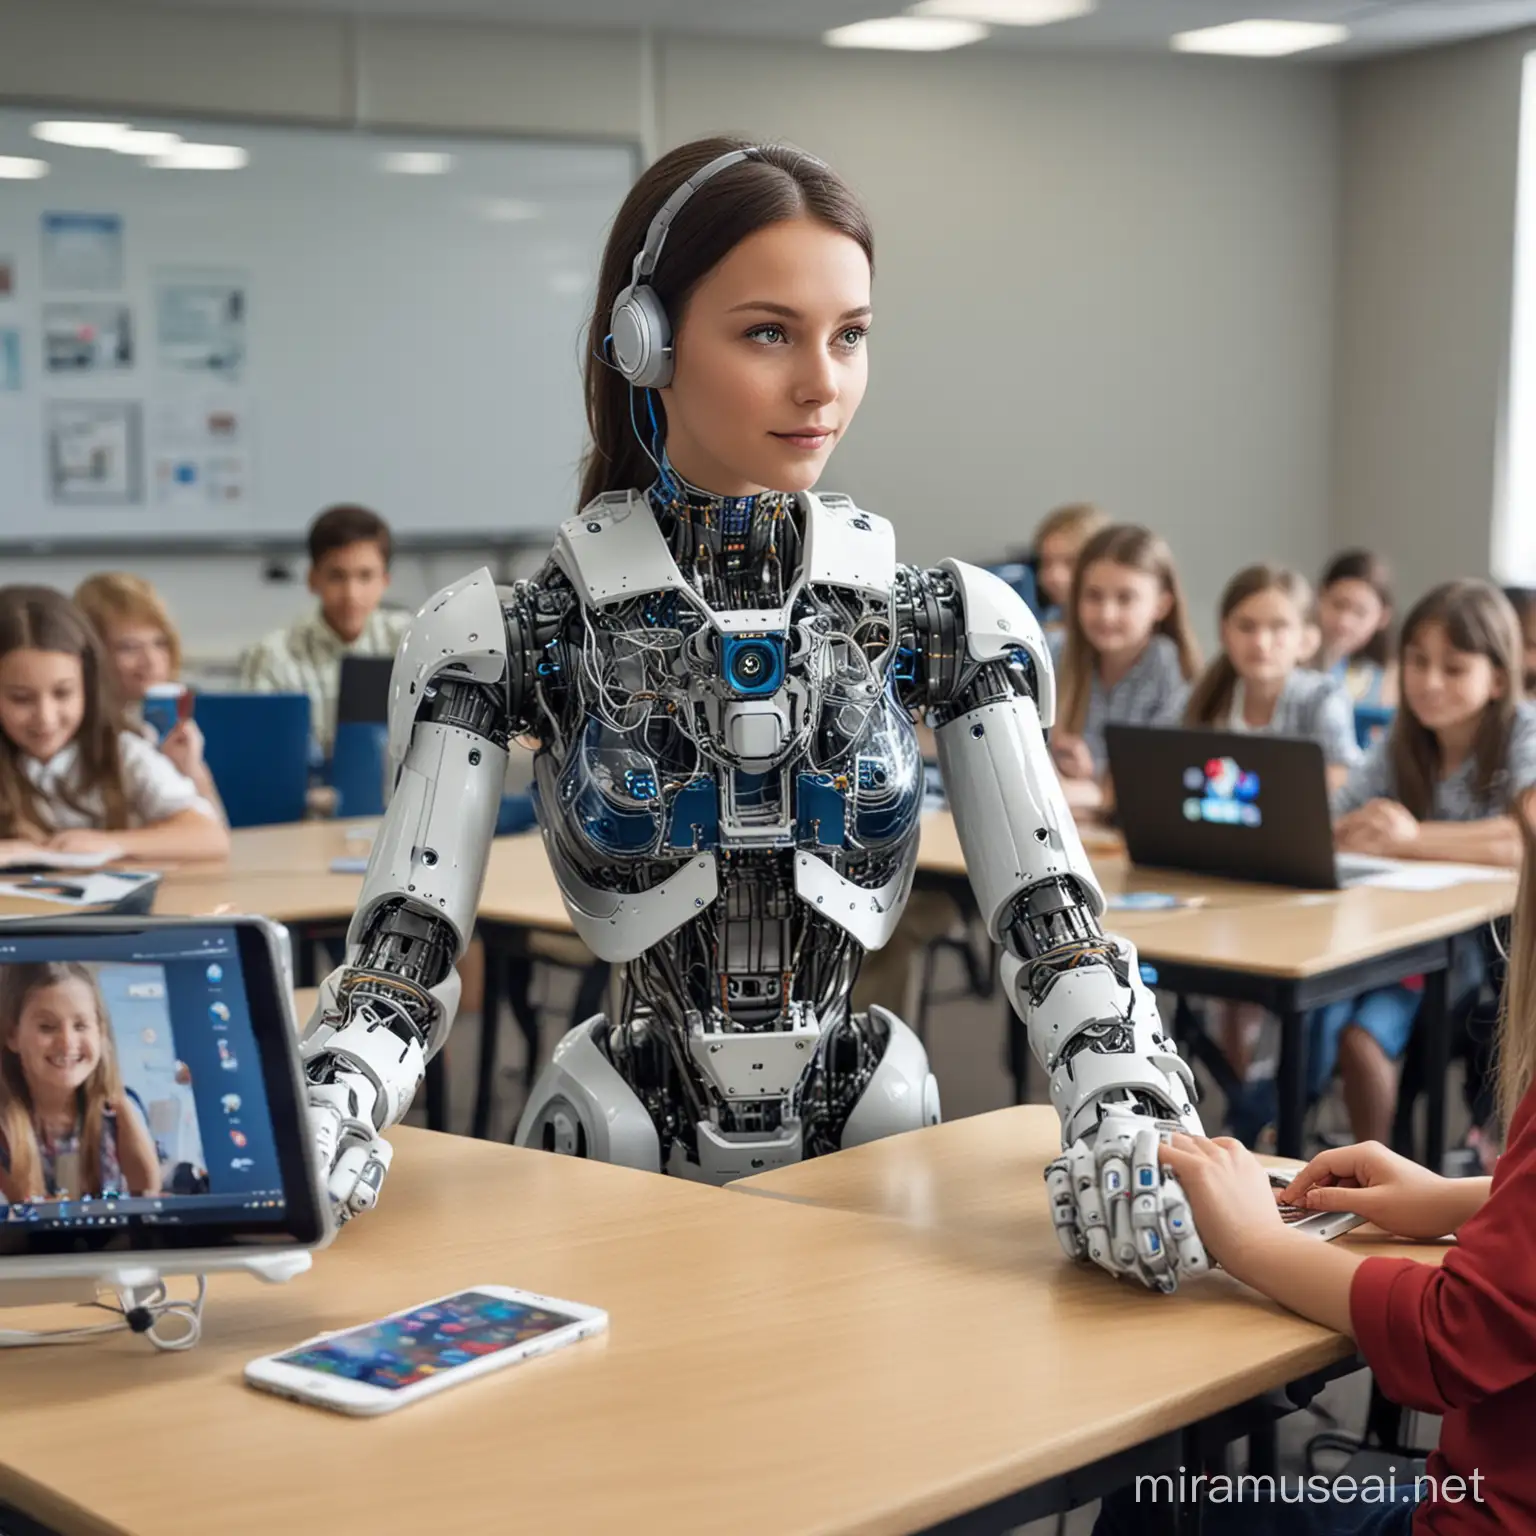 21st century classroom, teaching and learning, artificial intelligence